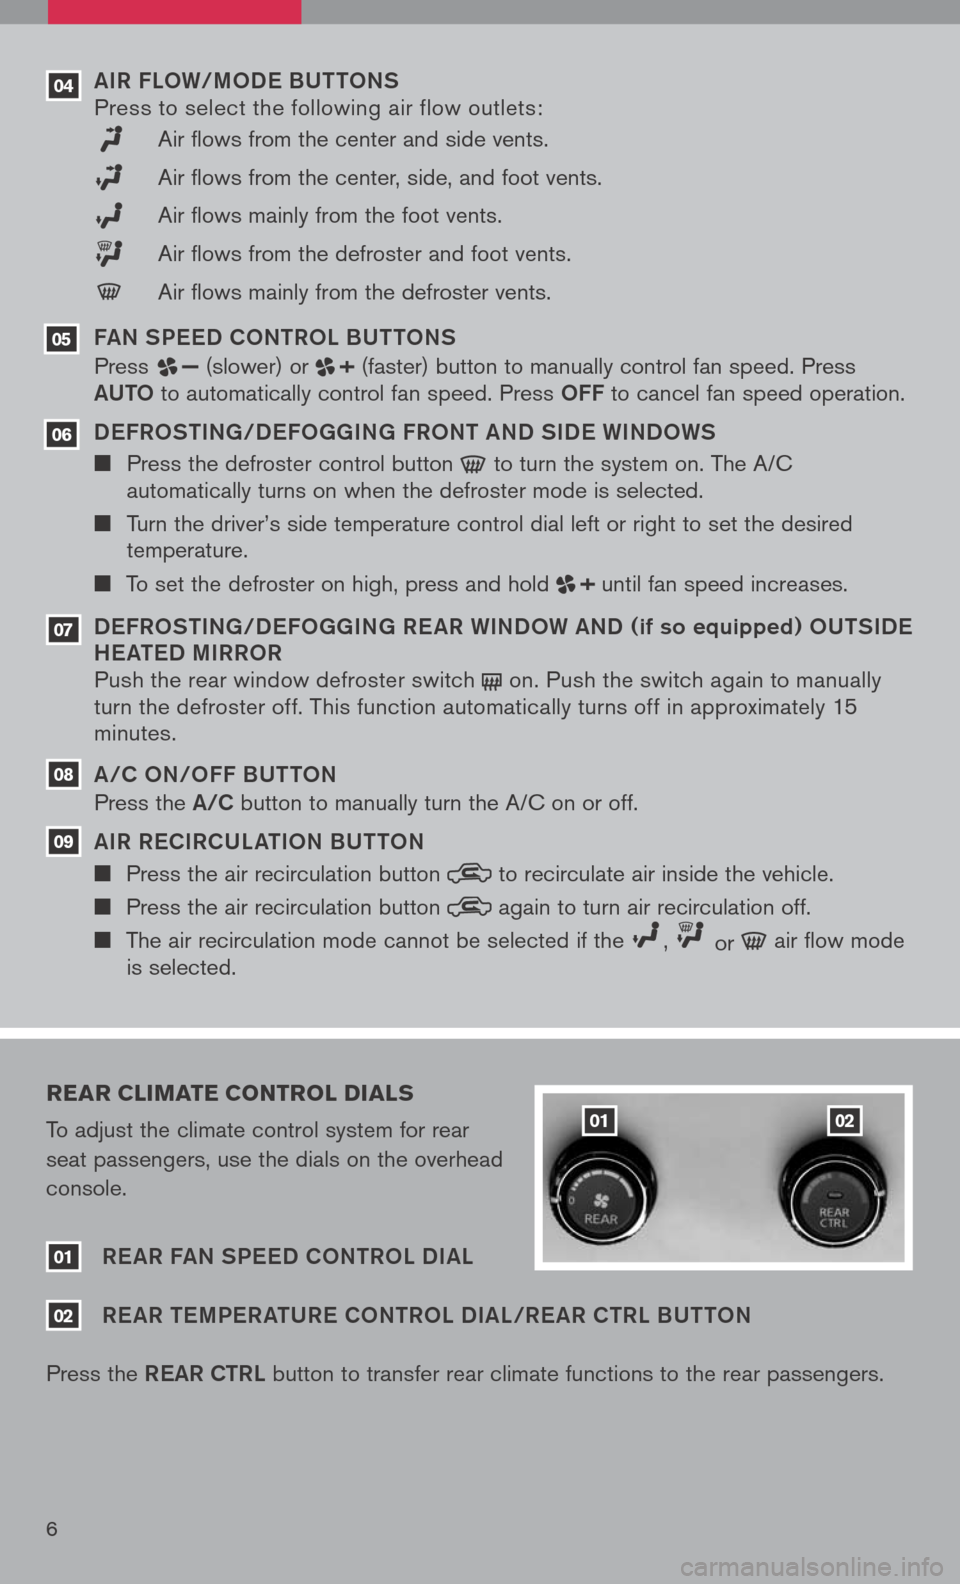 NISSAN PATHFINDER 2008 R51 / 3.G Quick Reference Guide 
aiR FLOW/ mOD e BU ttONSPress to select the following air flow outlets:
    Air flows from the center and side vents. 
    Air flows from the center, side, and foot vents.
    Air flows mainly from t